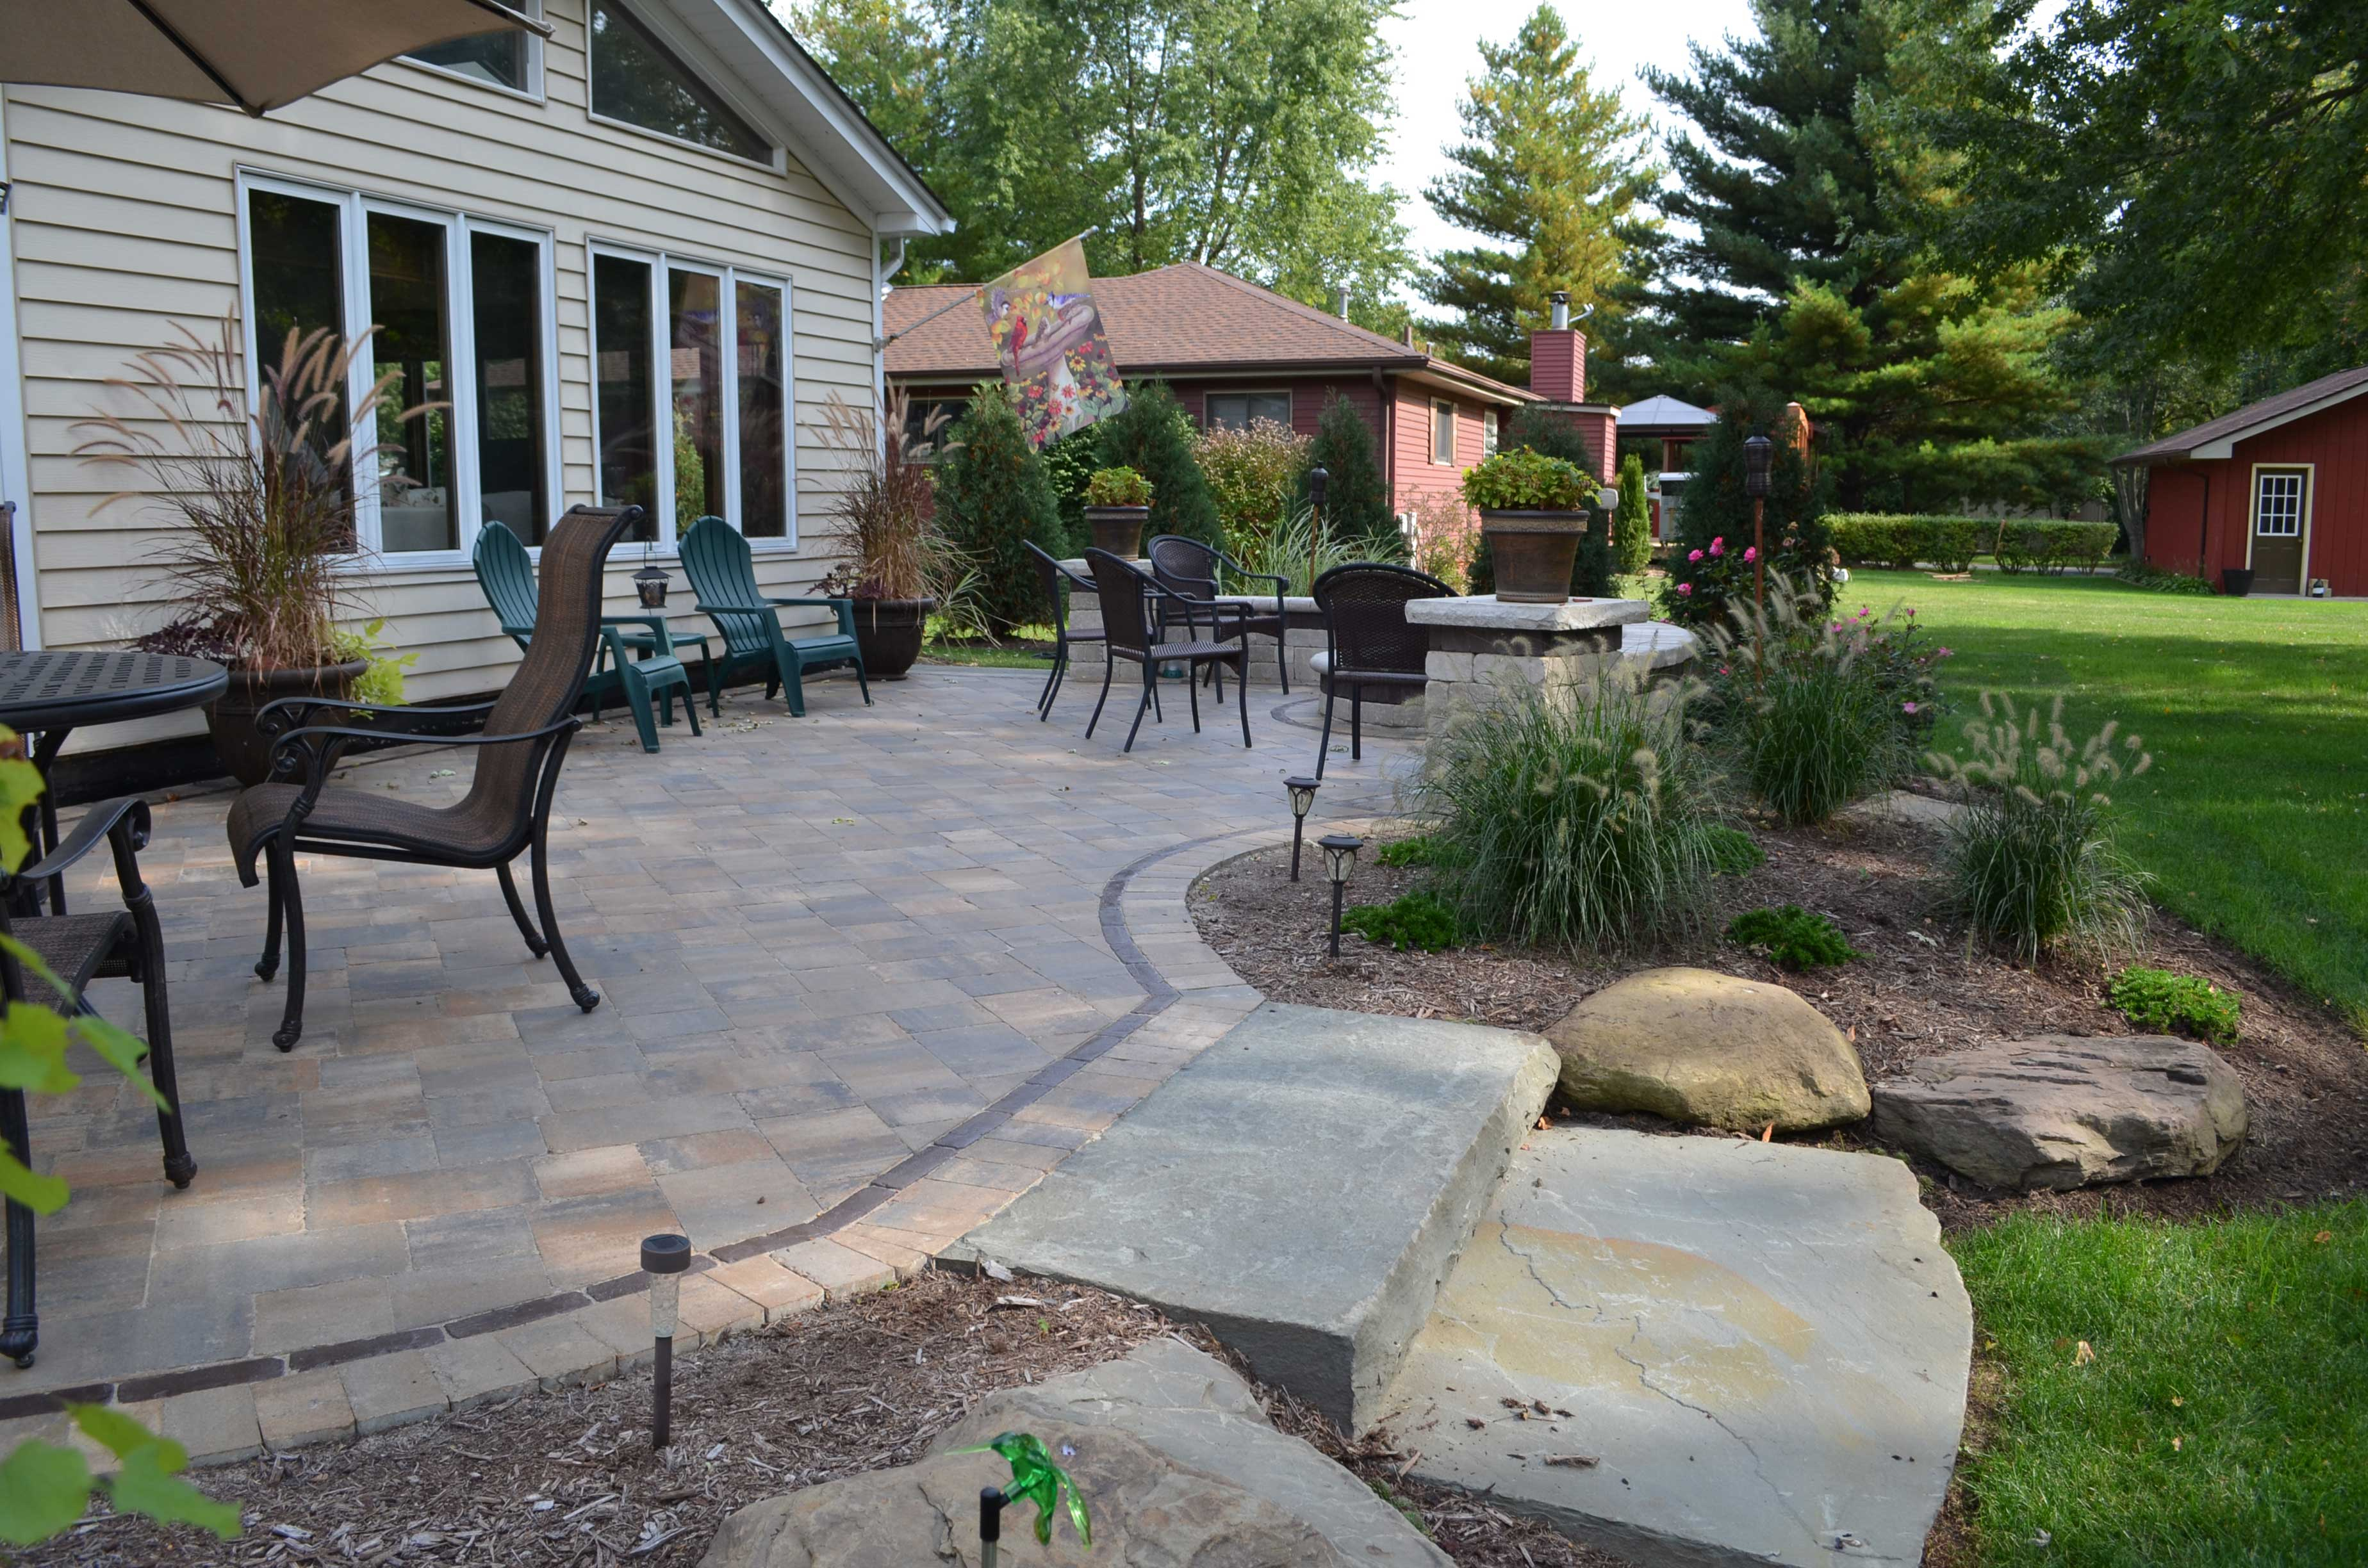 4 Reasons To Replace Wood Deck With Paver Patio Lombard in size 3696 X 2448